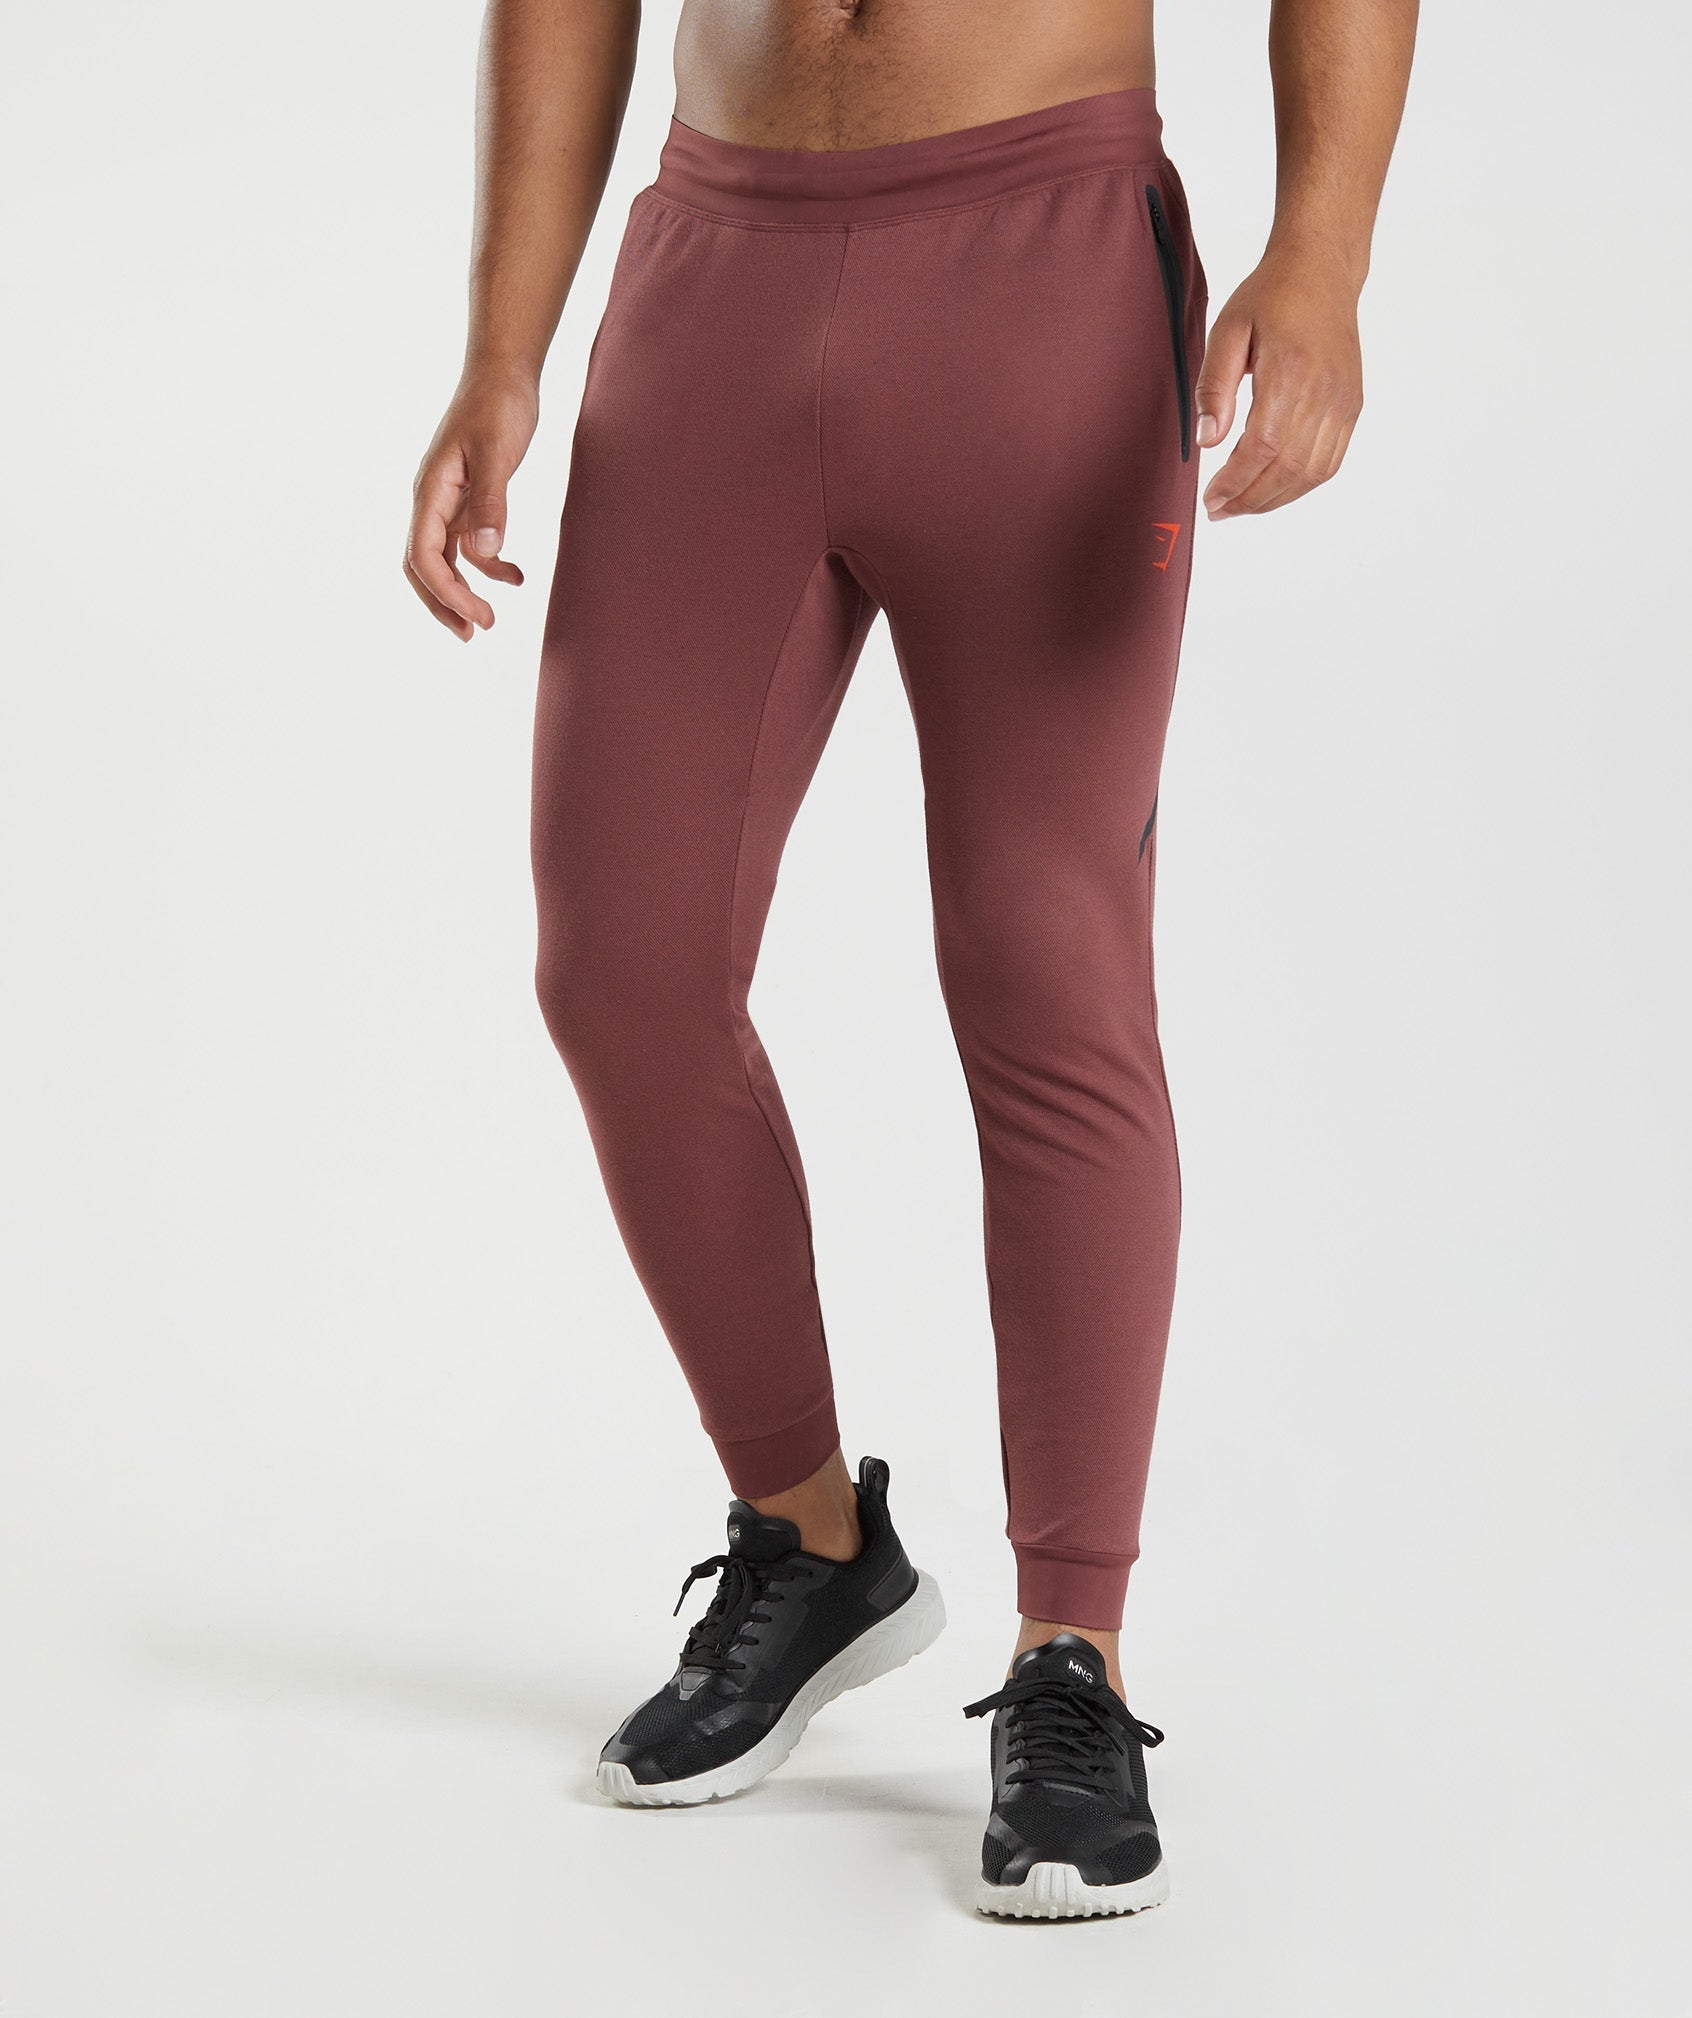 Gymshark Apex Technical Joggers - Silhouette Grey